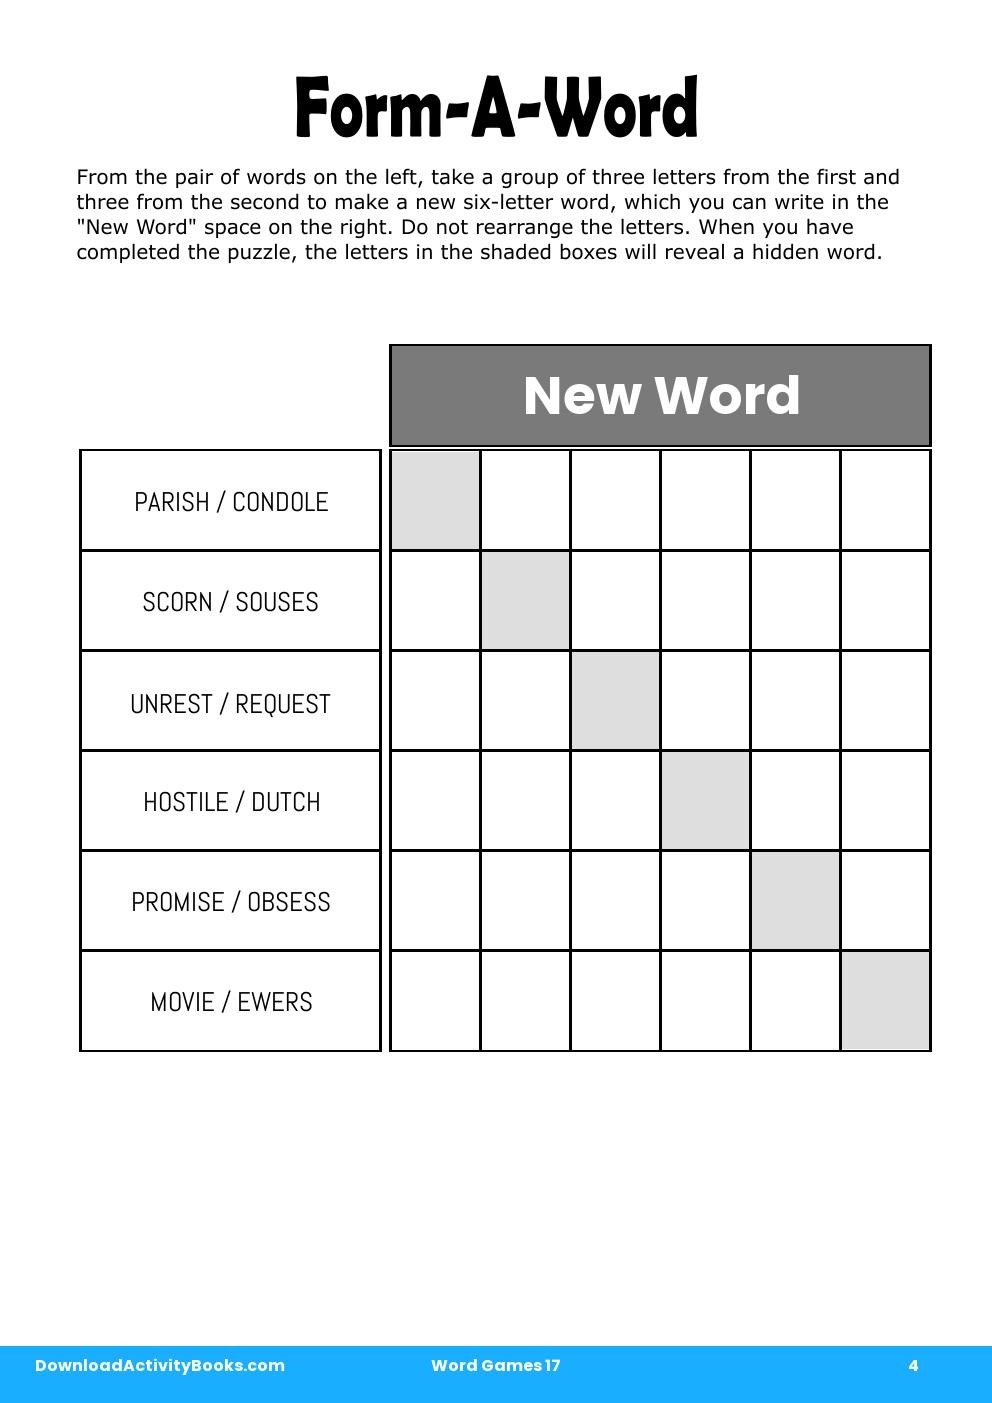 Form-A-Word in Word Games 17